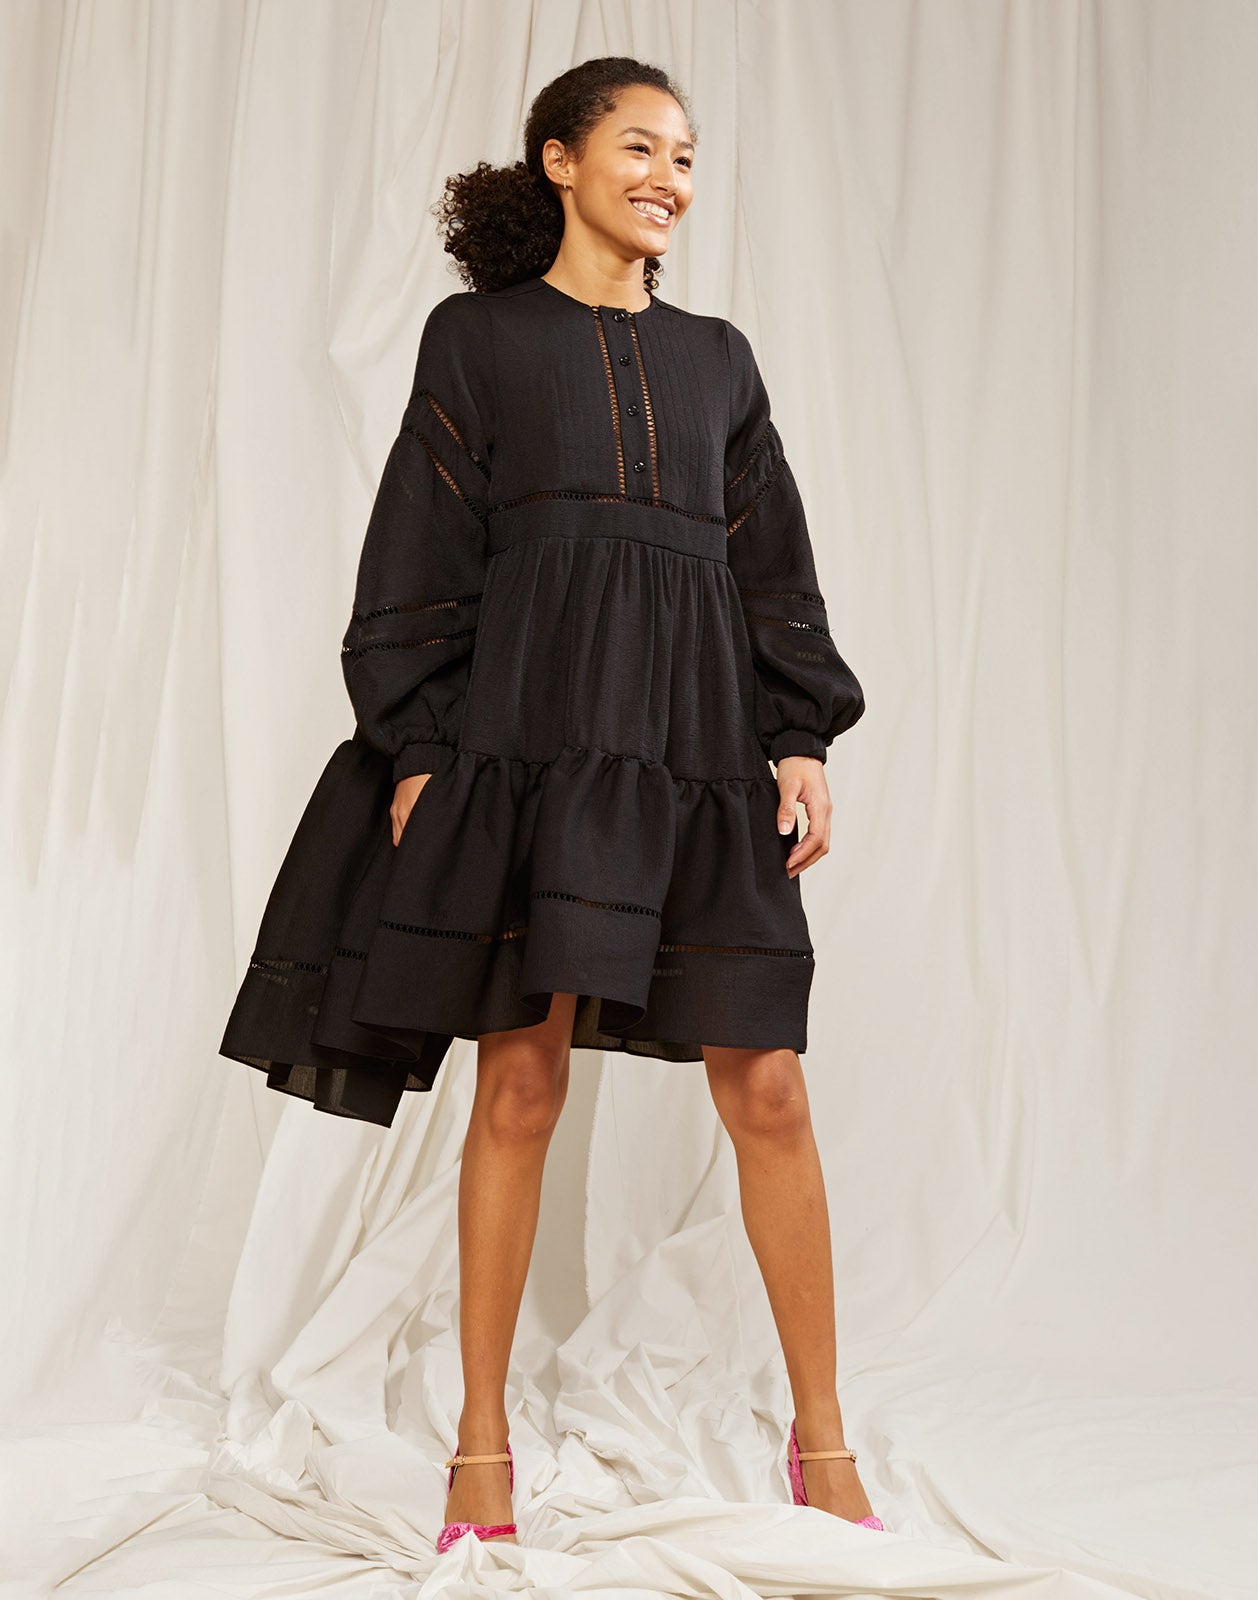 marionet Il indvirkning Roma Lace Trim Dress – Cynthia Rowley